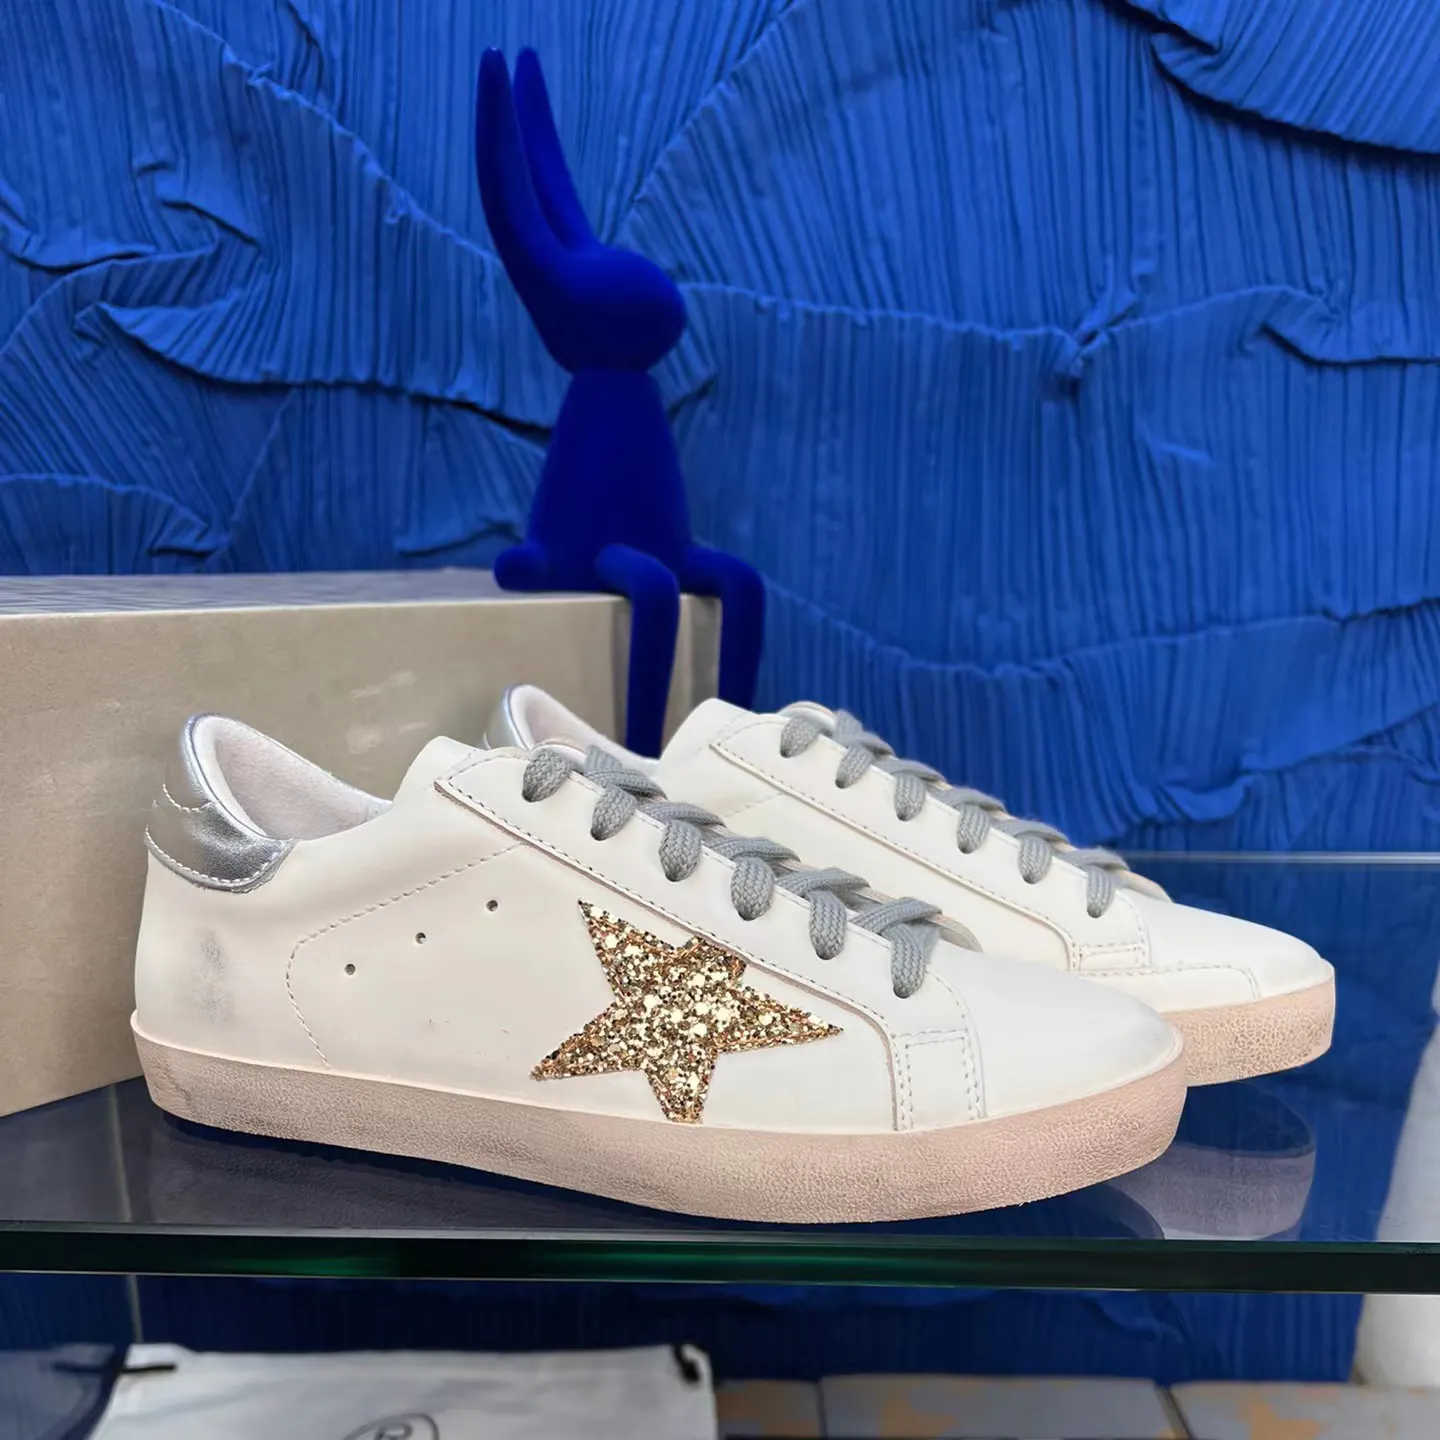 Goldens White leather Super-Star sneakers glittery heel tab gooses men Shoes walking style shoes